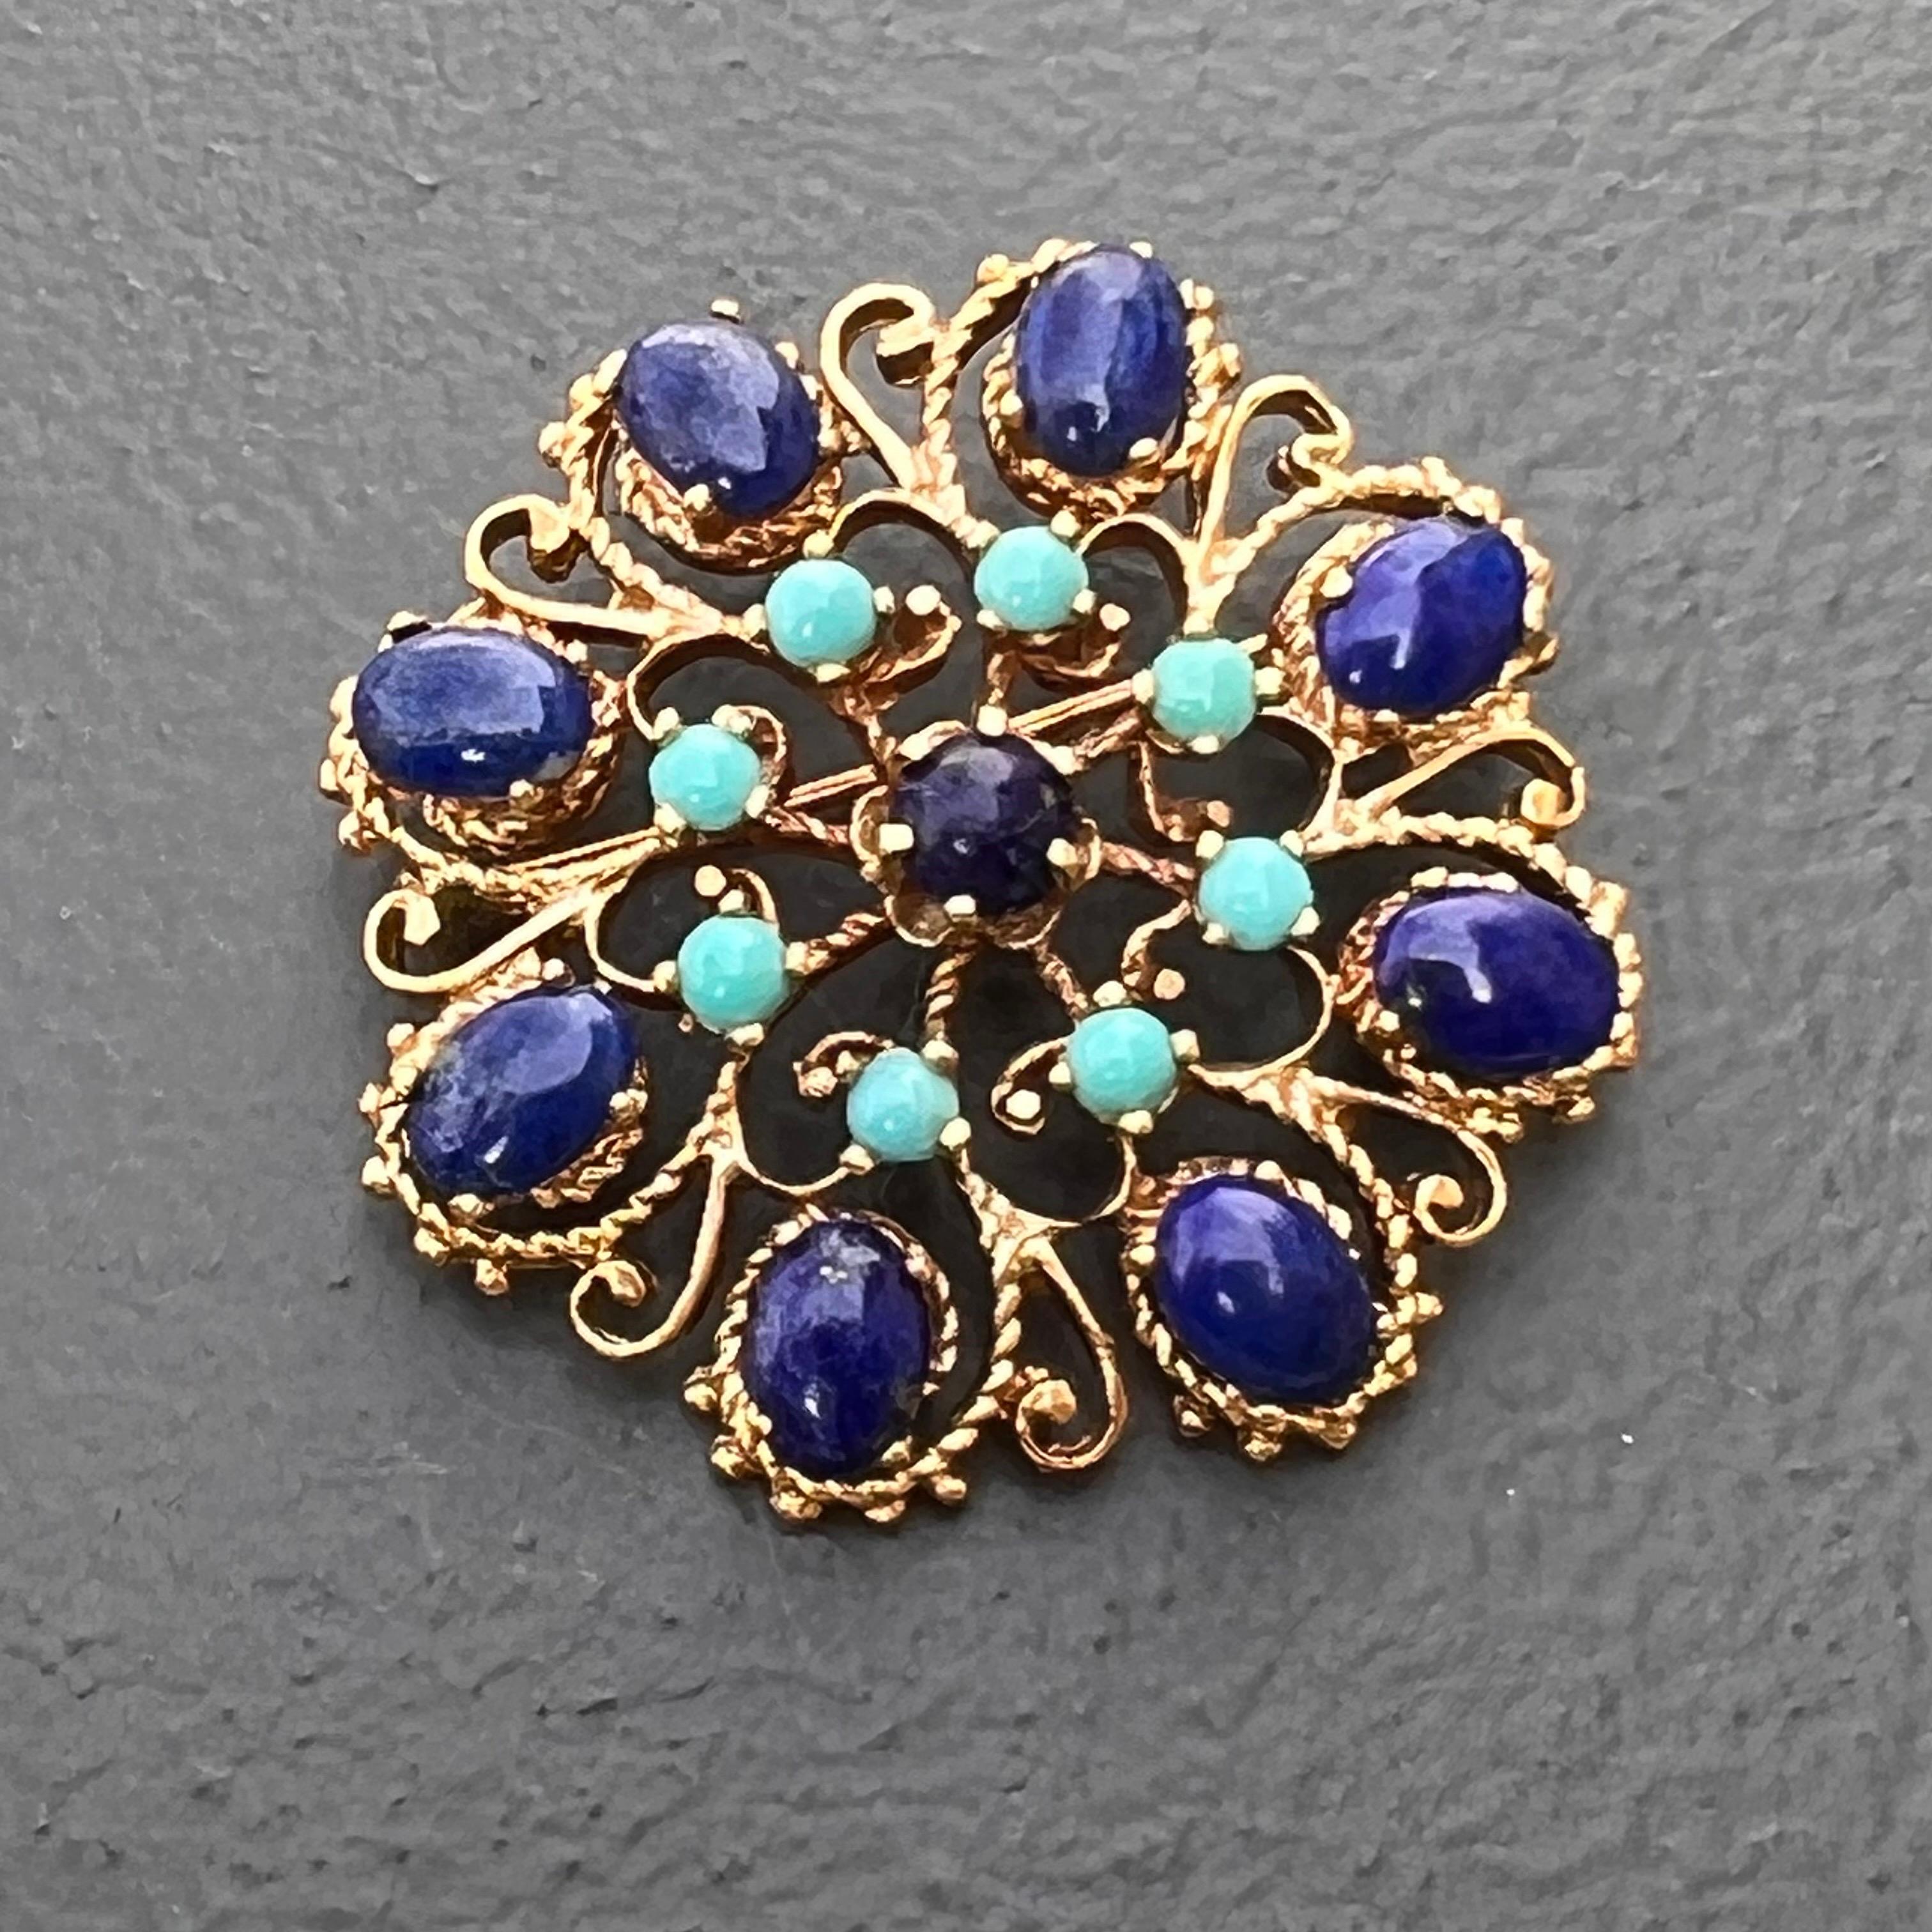 14 Karat Gold Turquoise and Lapis Victorian  Revival Brooch In Good Condition For Sale In Plainsboro, NJ